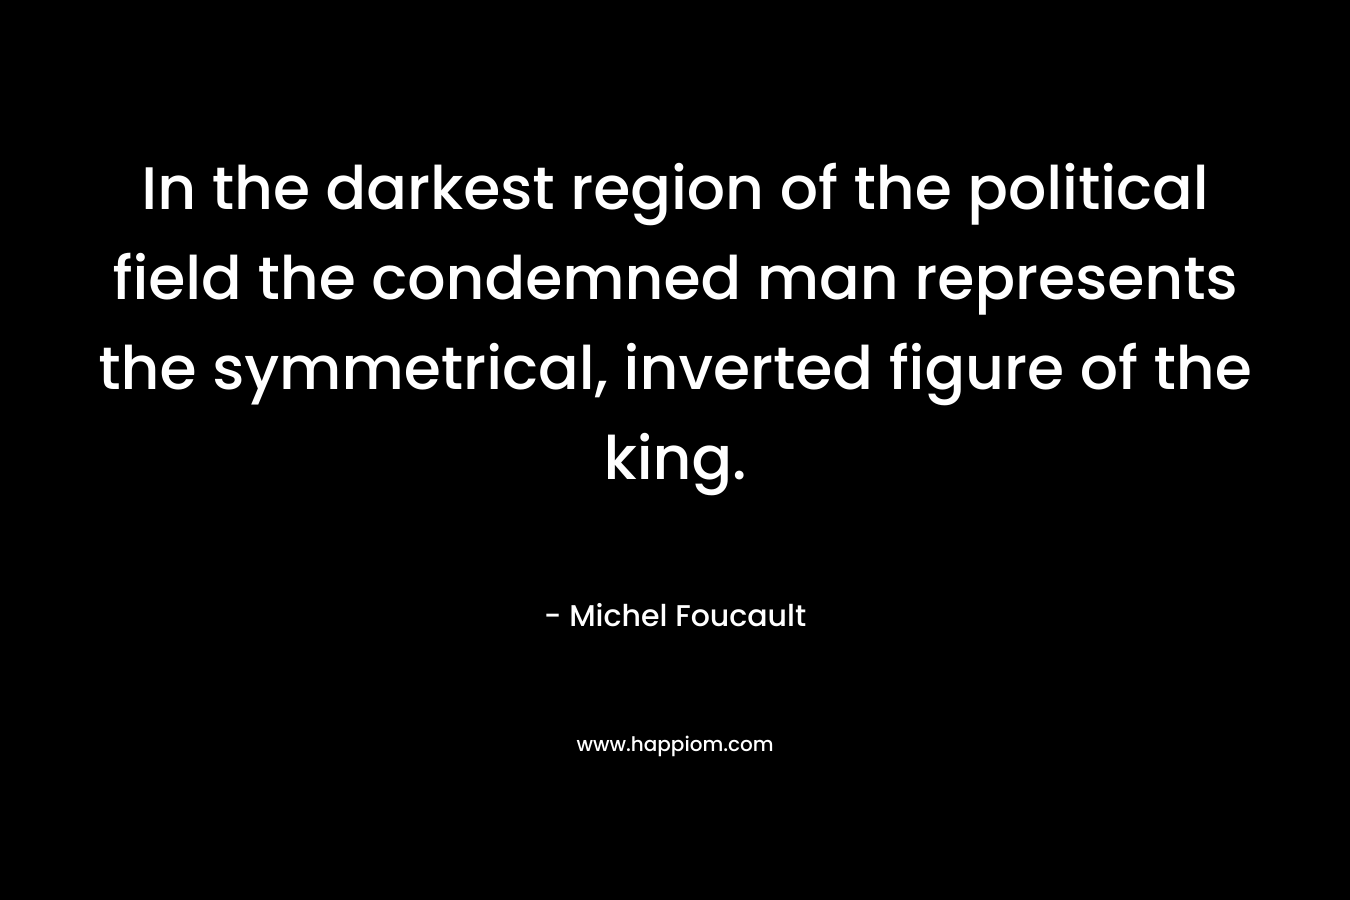 In the darkest region of the political field the condemned man represents the symmetrical, inverted figure of the king. – Michel Foucault